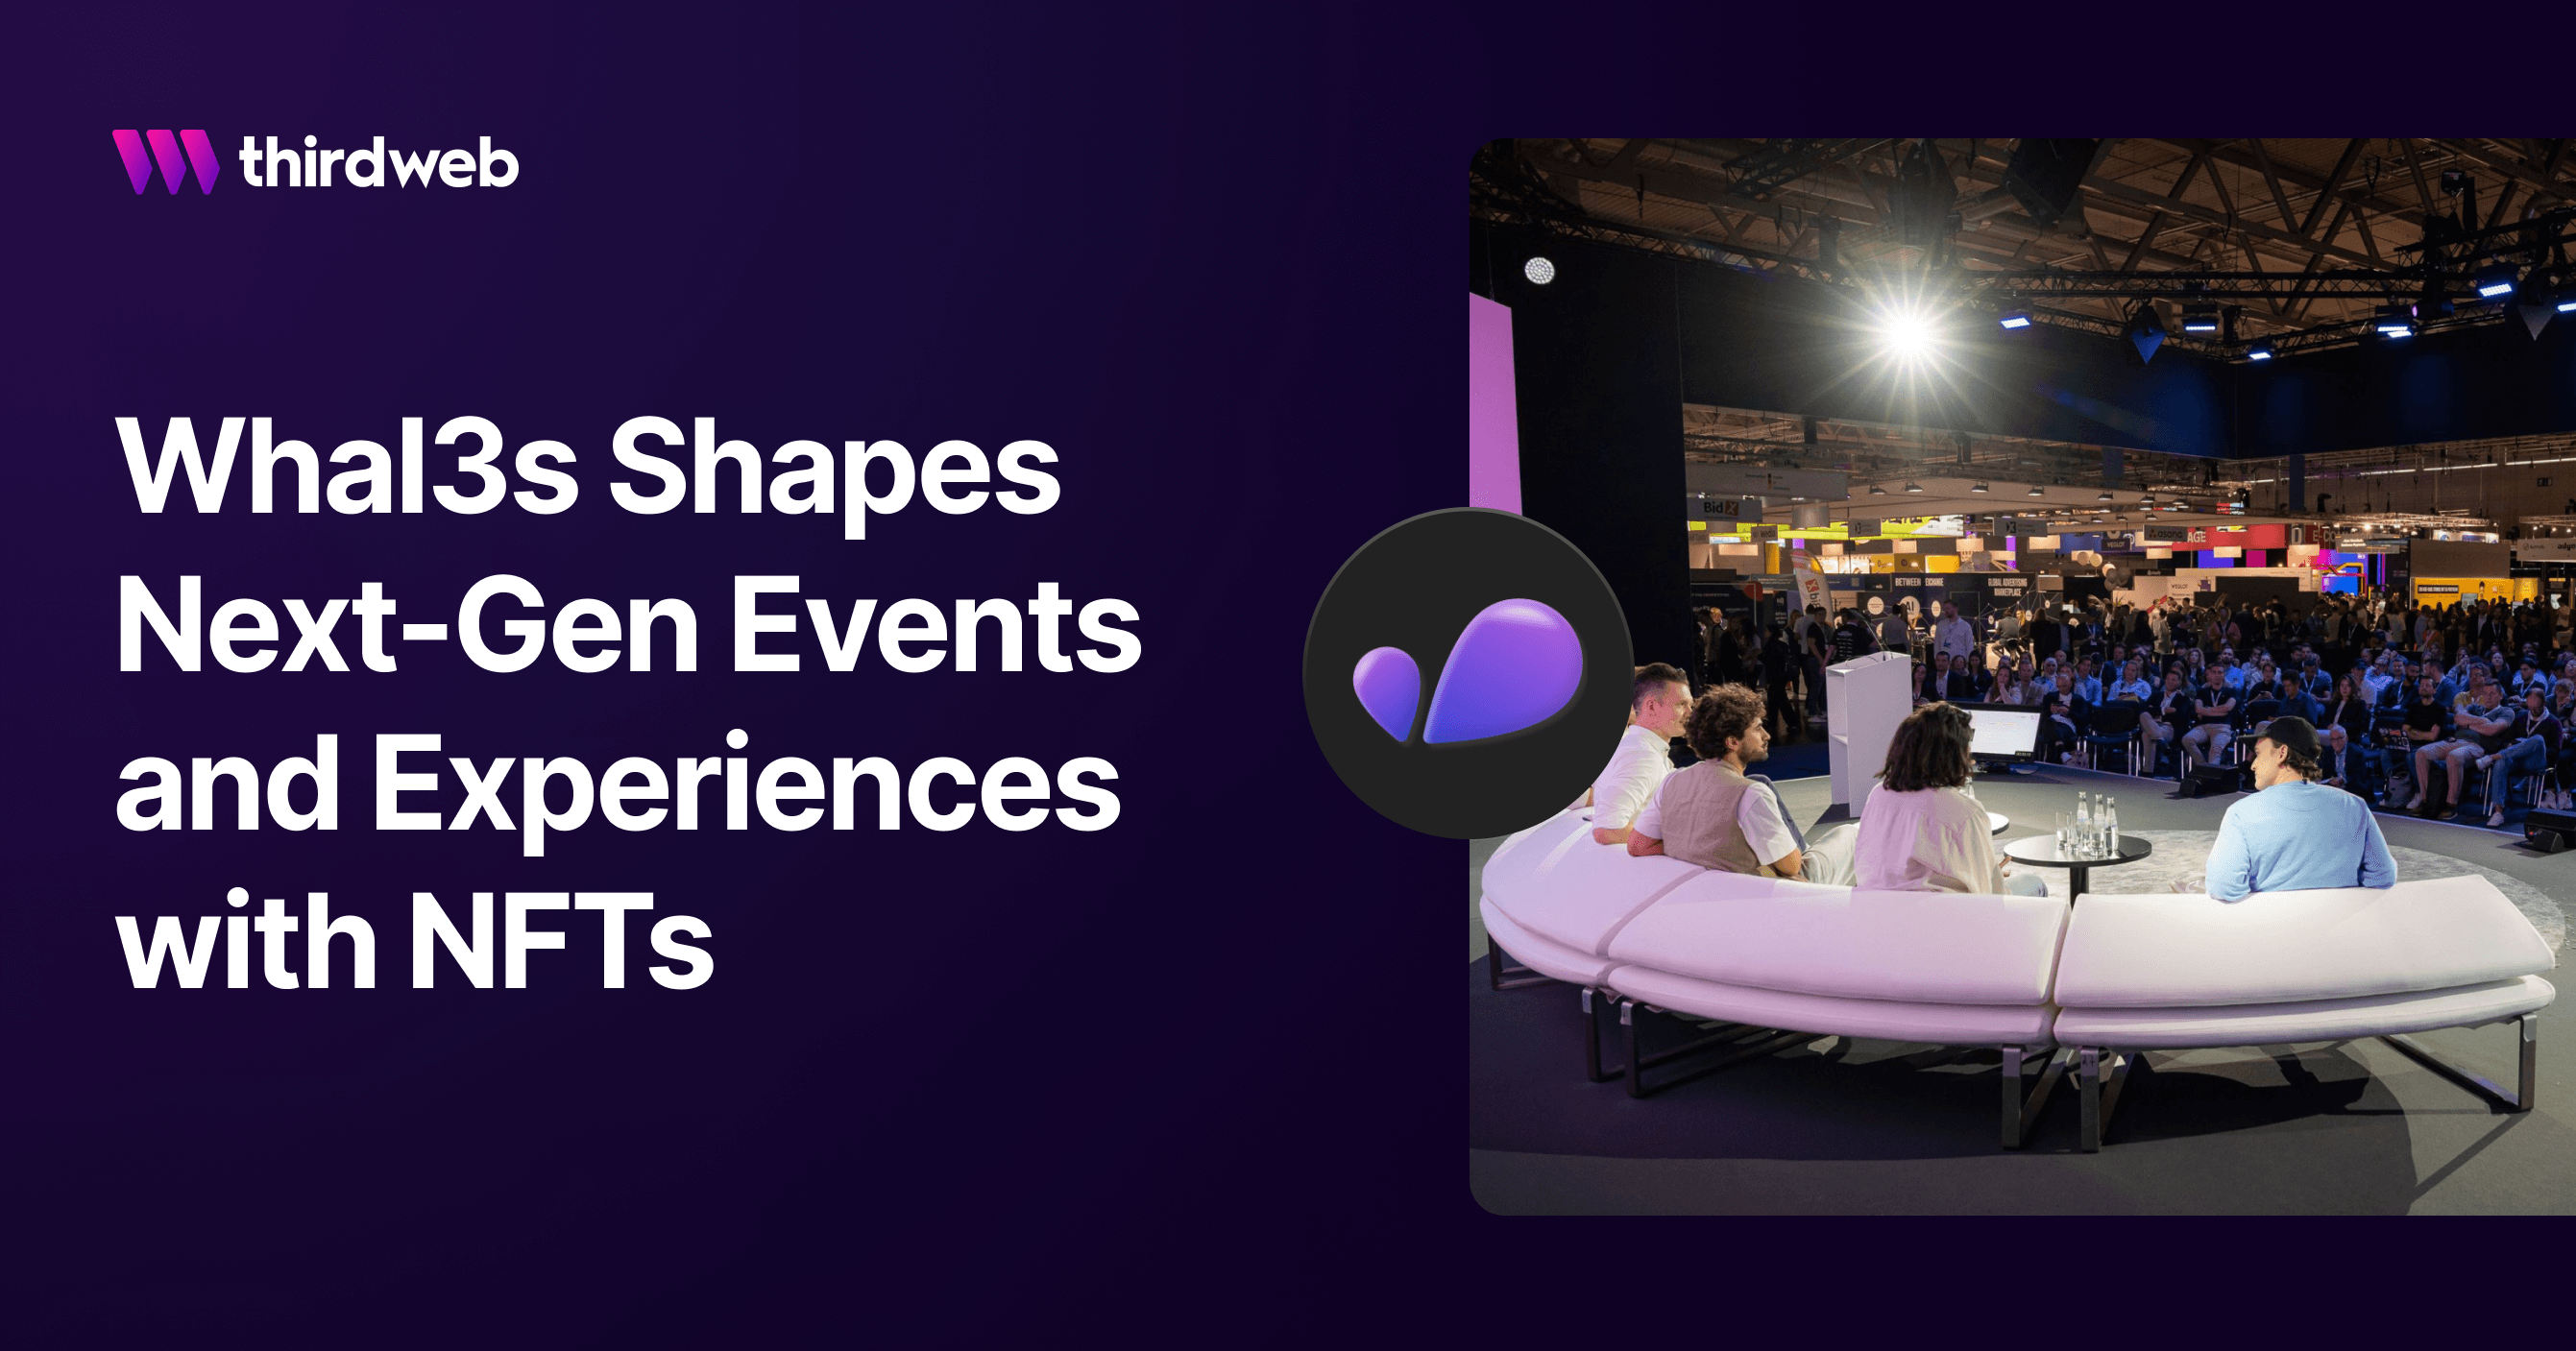 Whal3s Shapes Next-Gen Events & Experiences with NFTs